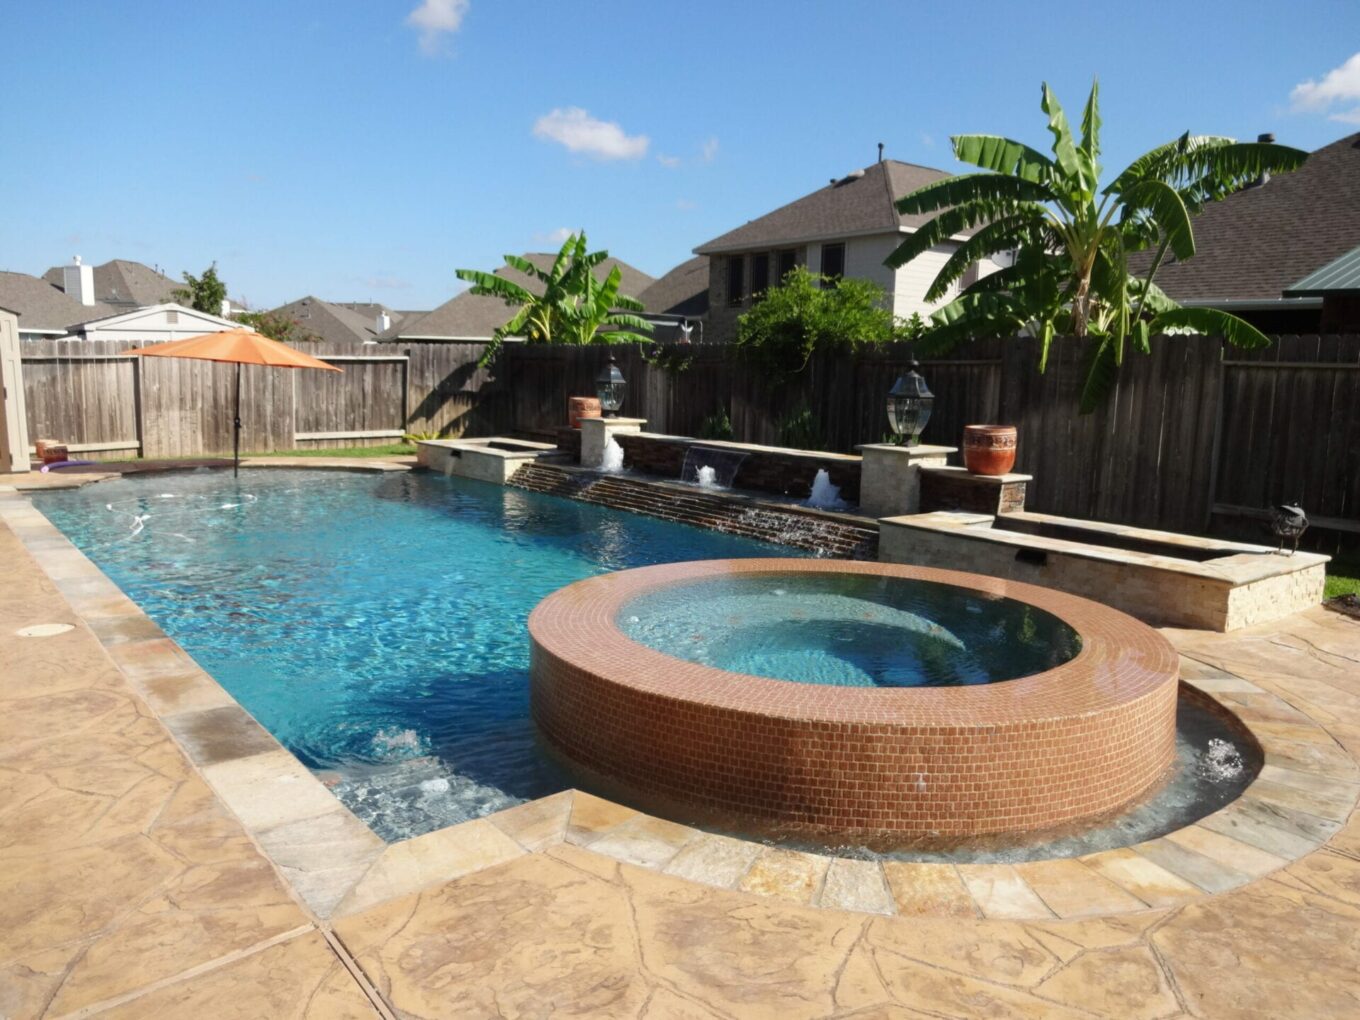 A pool with a jacuzzi and a large stone wall.